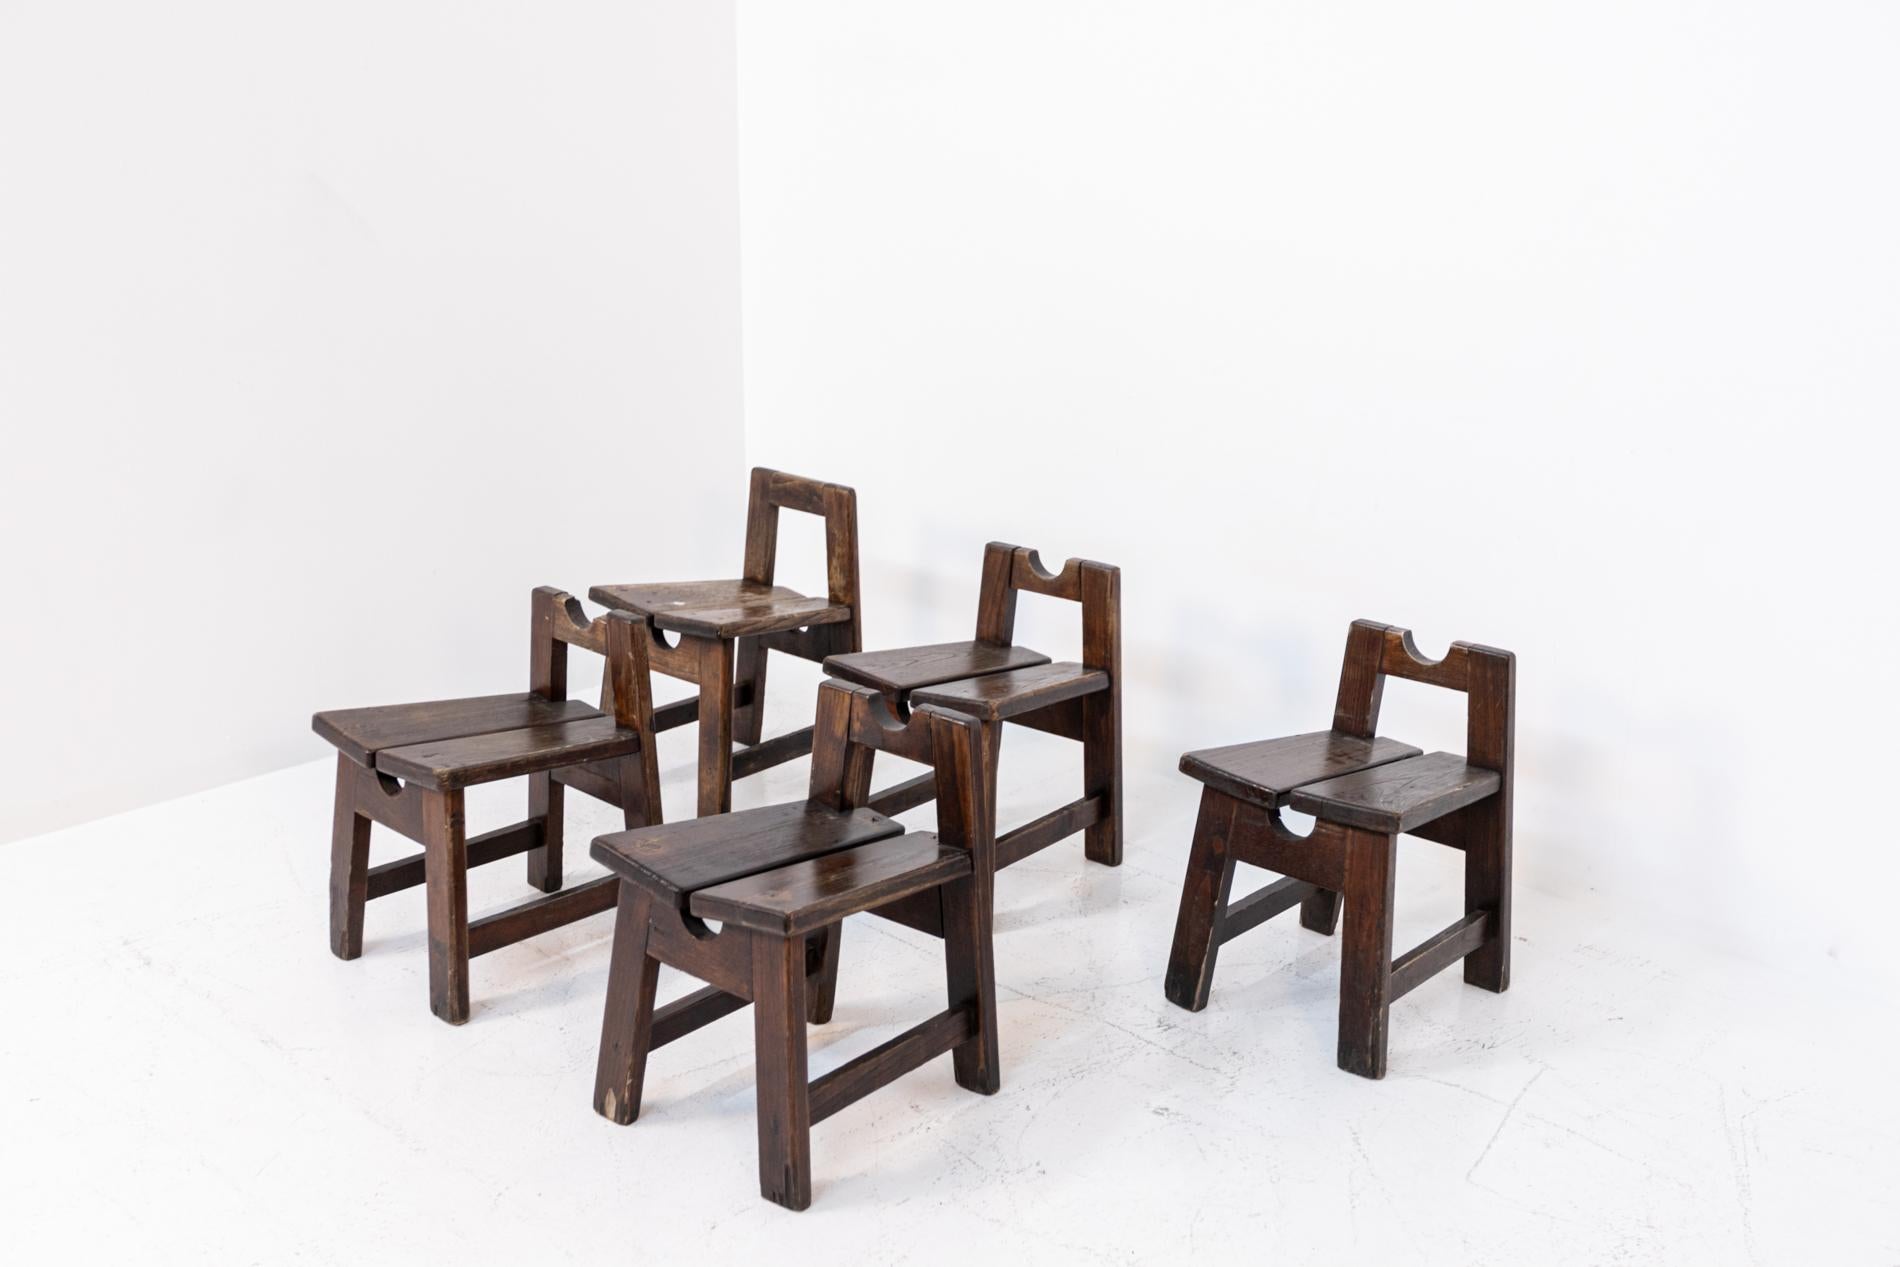 Nice Italian set composed of five stools in fine and sturdy wood from the 50s.
The Italian stools are very special, as they look like miniature chairs, they have a small back, the seat instead is composed of two parts of wood slightly separated